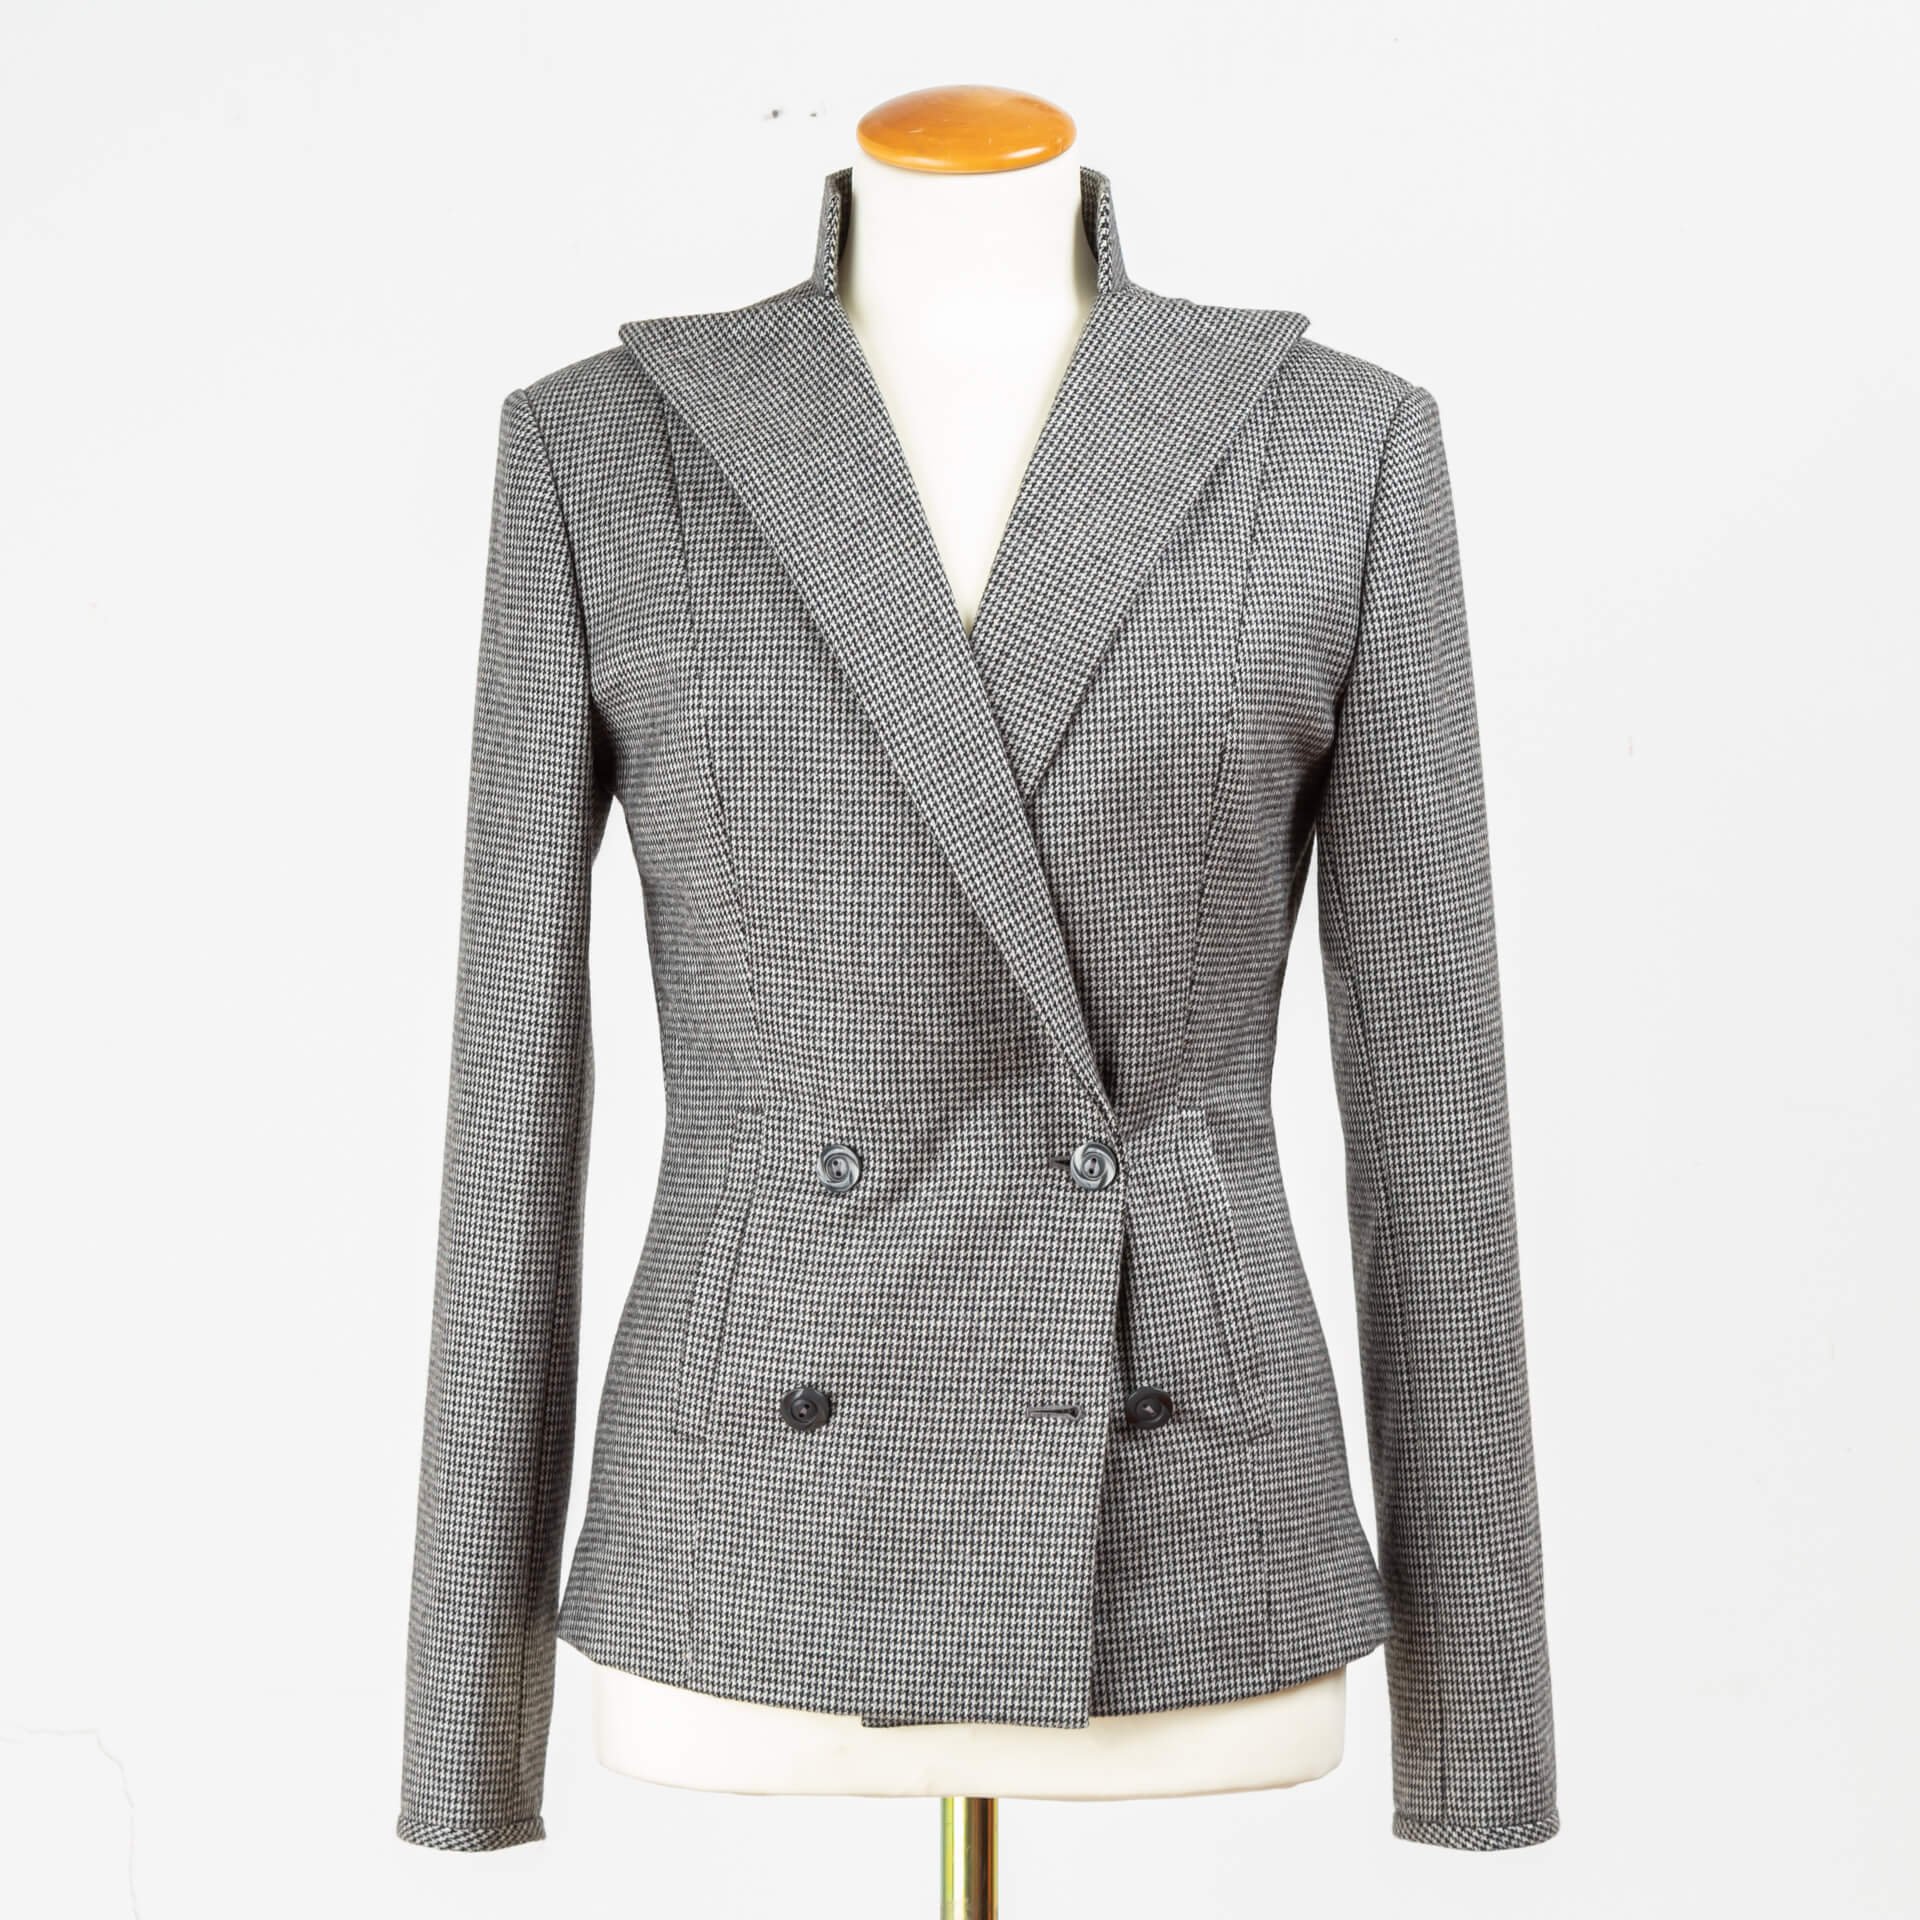 Blazer Double Breasted Stand-Up Collar Pied De Poule Houndstooth.